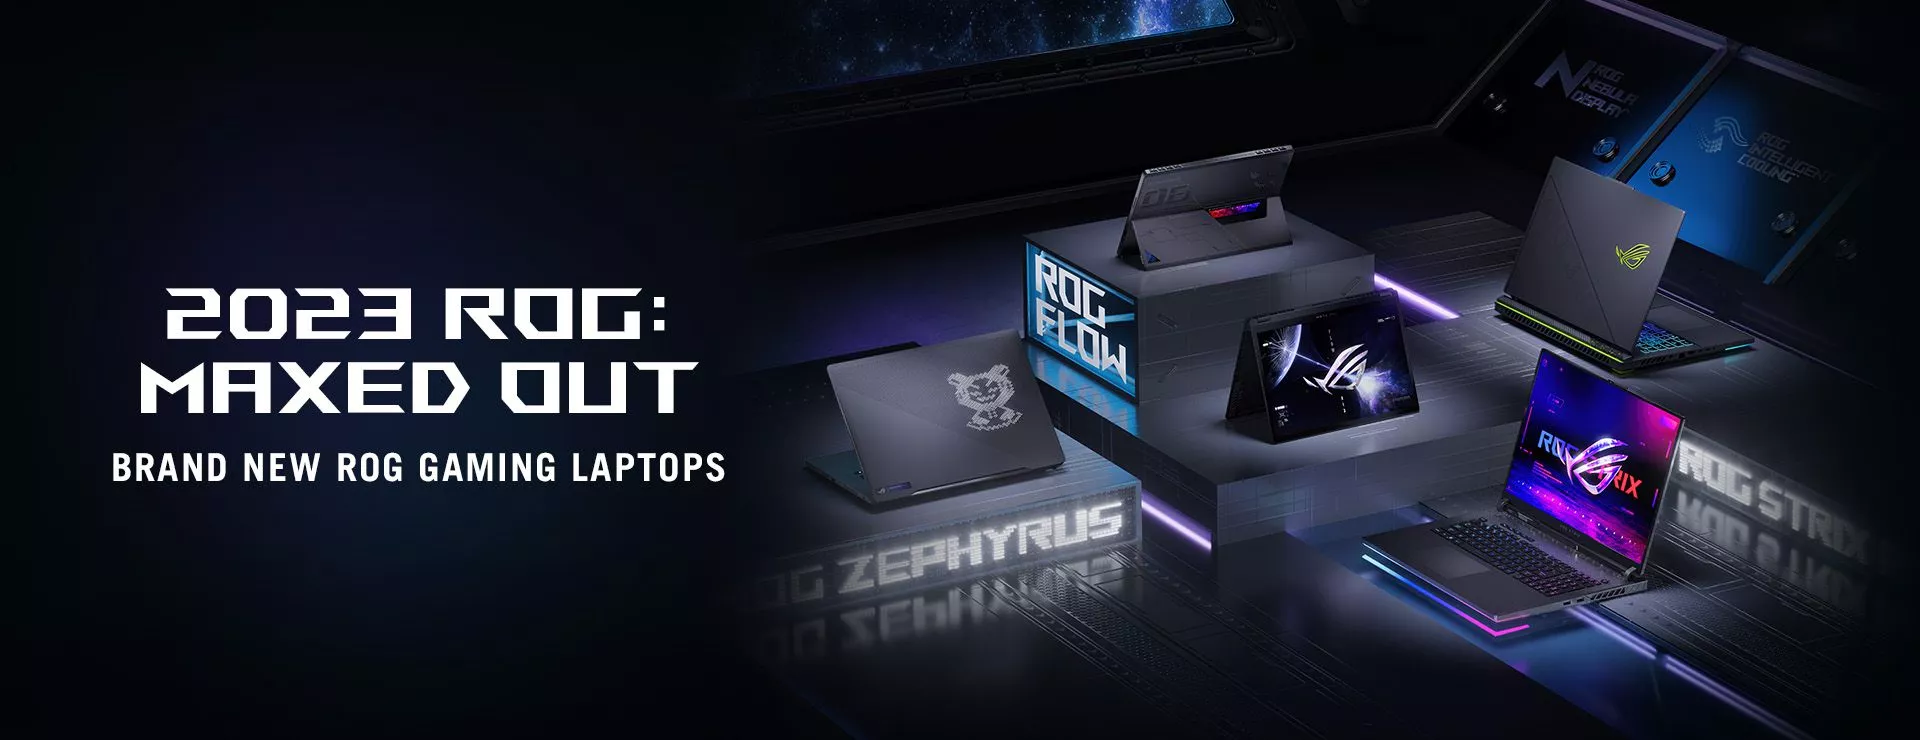 5 ROG Laptops in picture  2023 ROG:  Maxed Out Brand New ROG Gaming Laptops